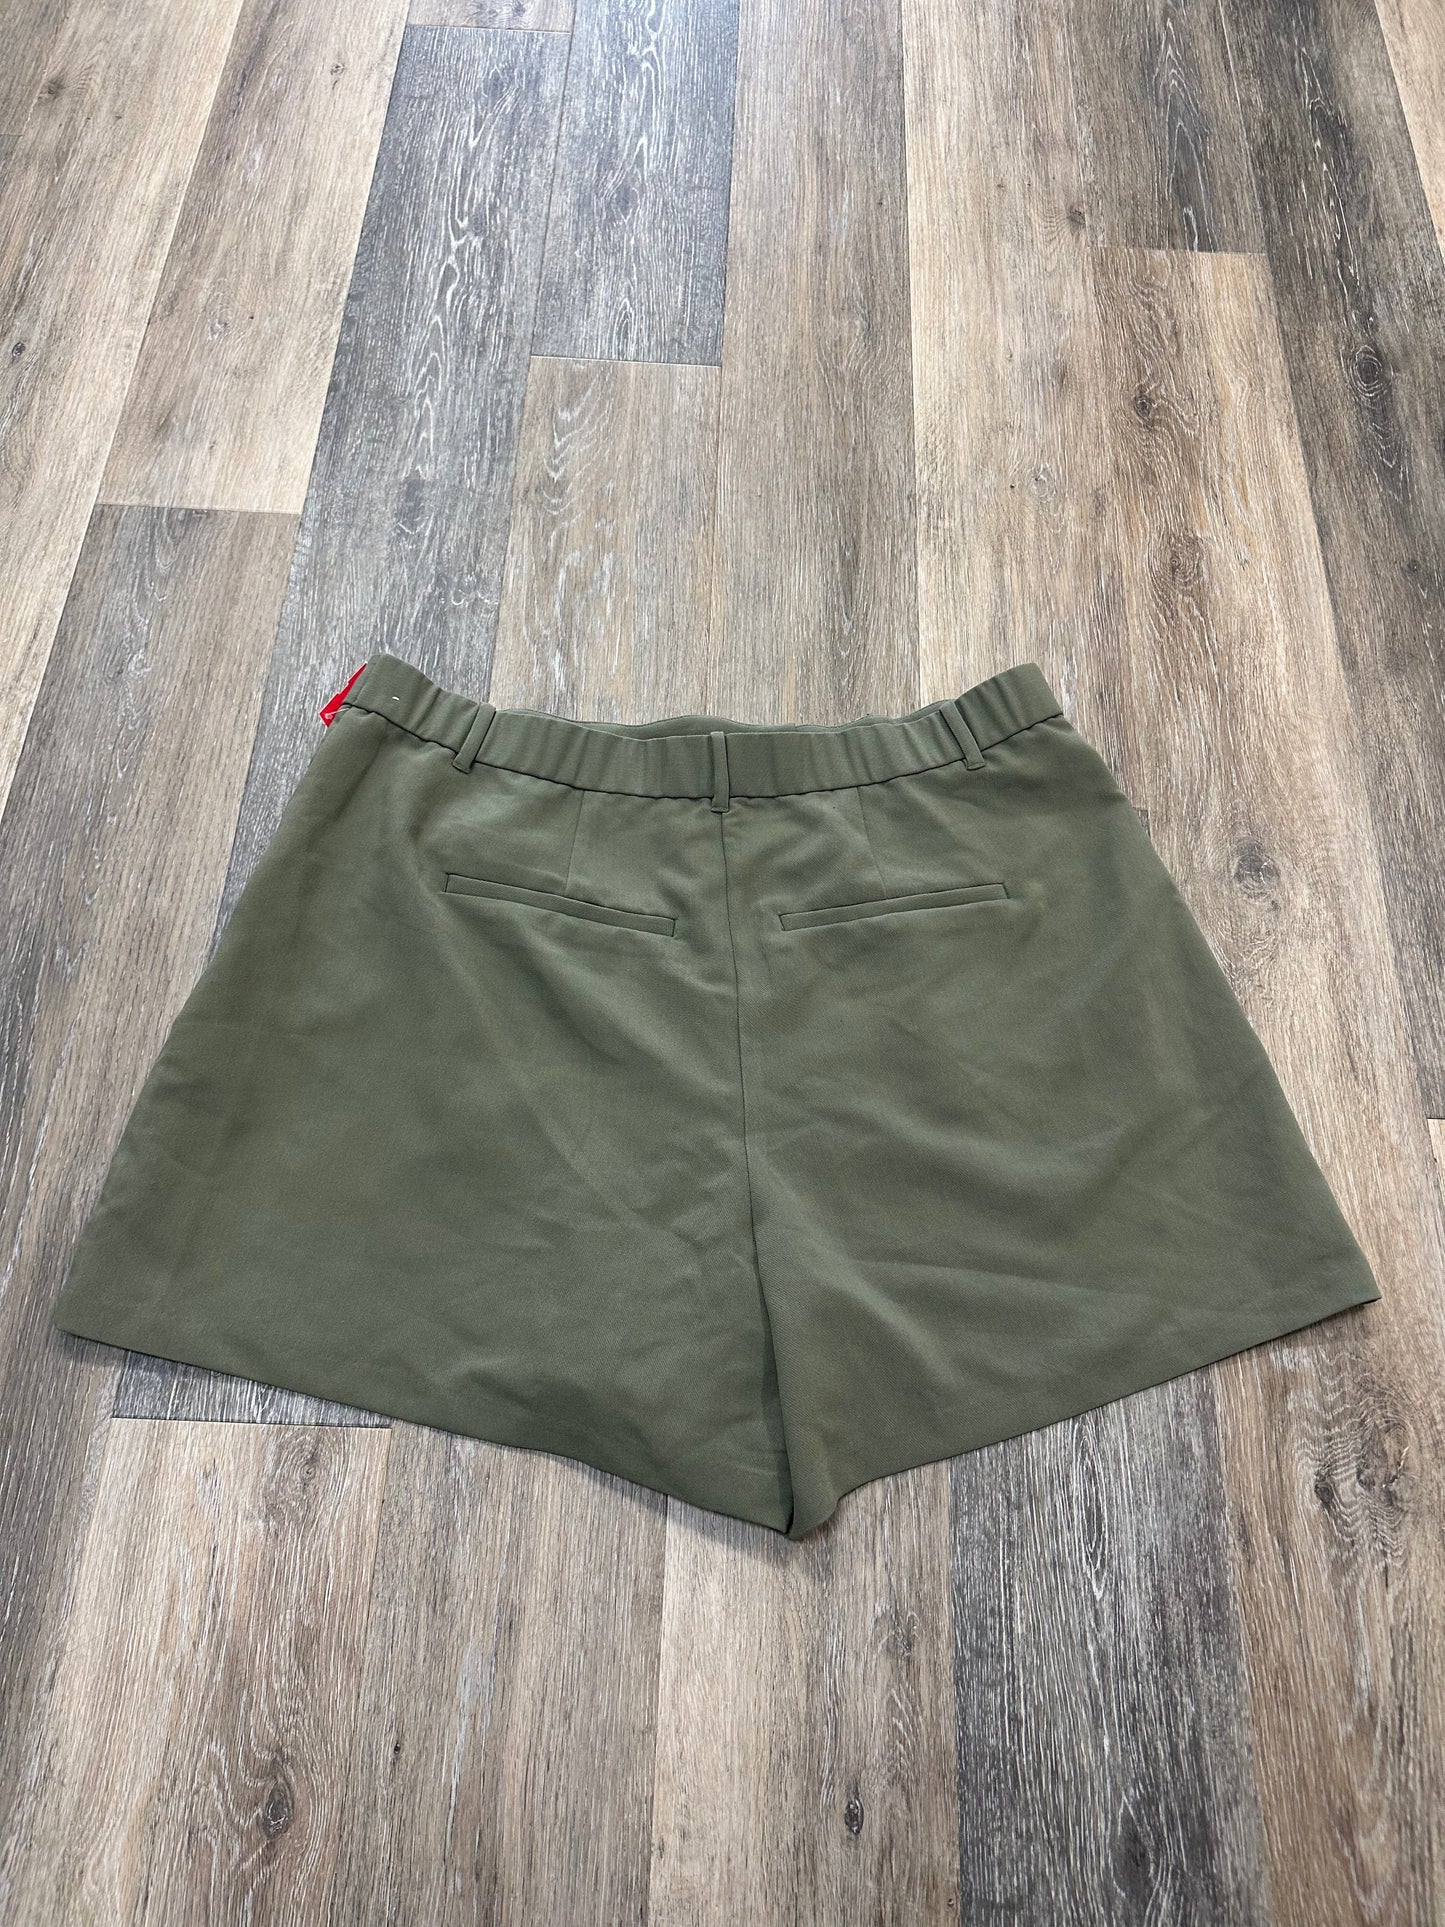 Green Shorts Abercrombie And Fitch, Size Xl